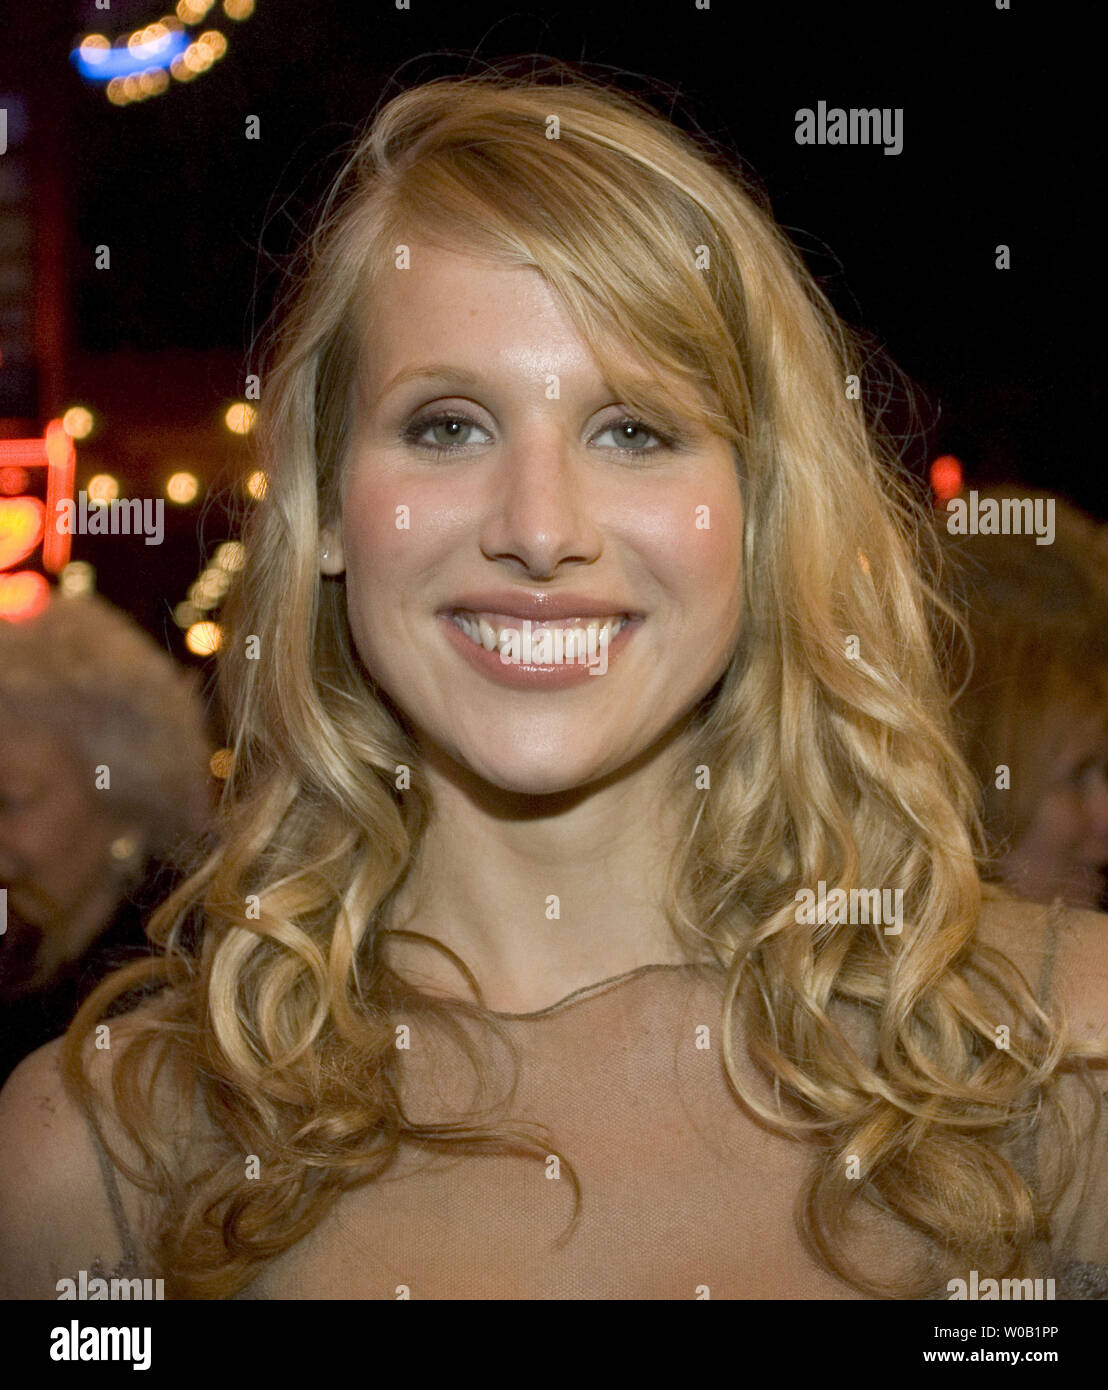 Actress Lucy Punch arrives at the Vancouver International Film Festival opening gala party at Vancouver's Commodore Ballroom, September 23, 2004, following the premiere screening of 'Being Julia' in which she has a role.       (UPI Photo/Heinz Ruckemann) Stock Photo